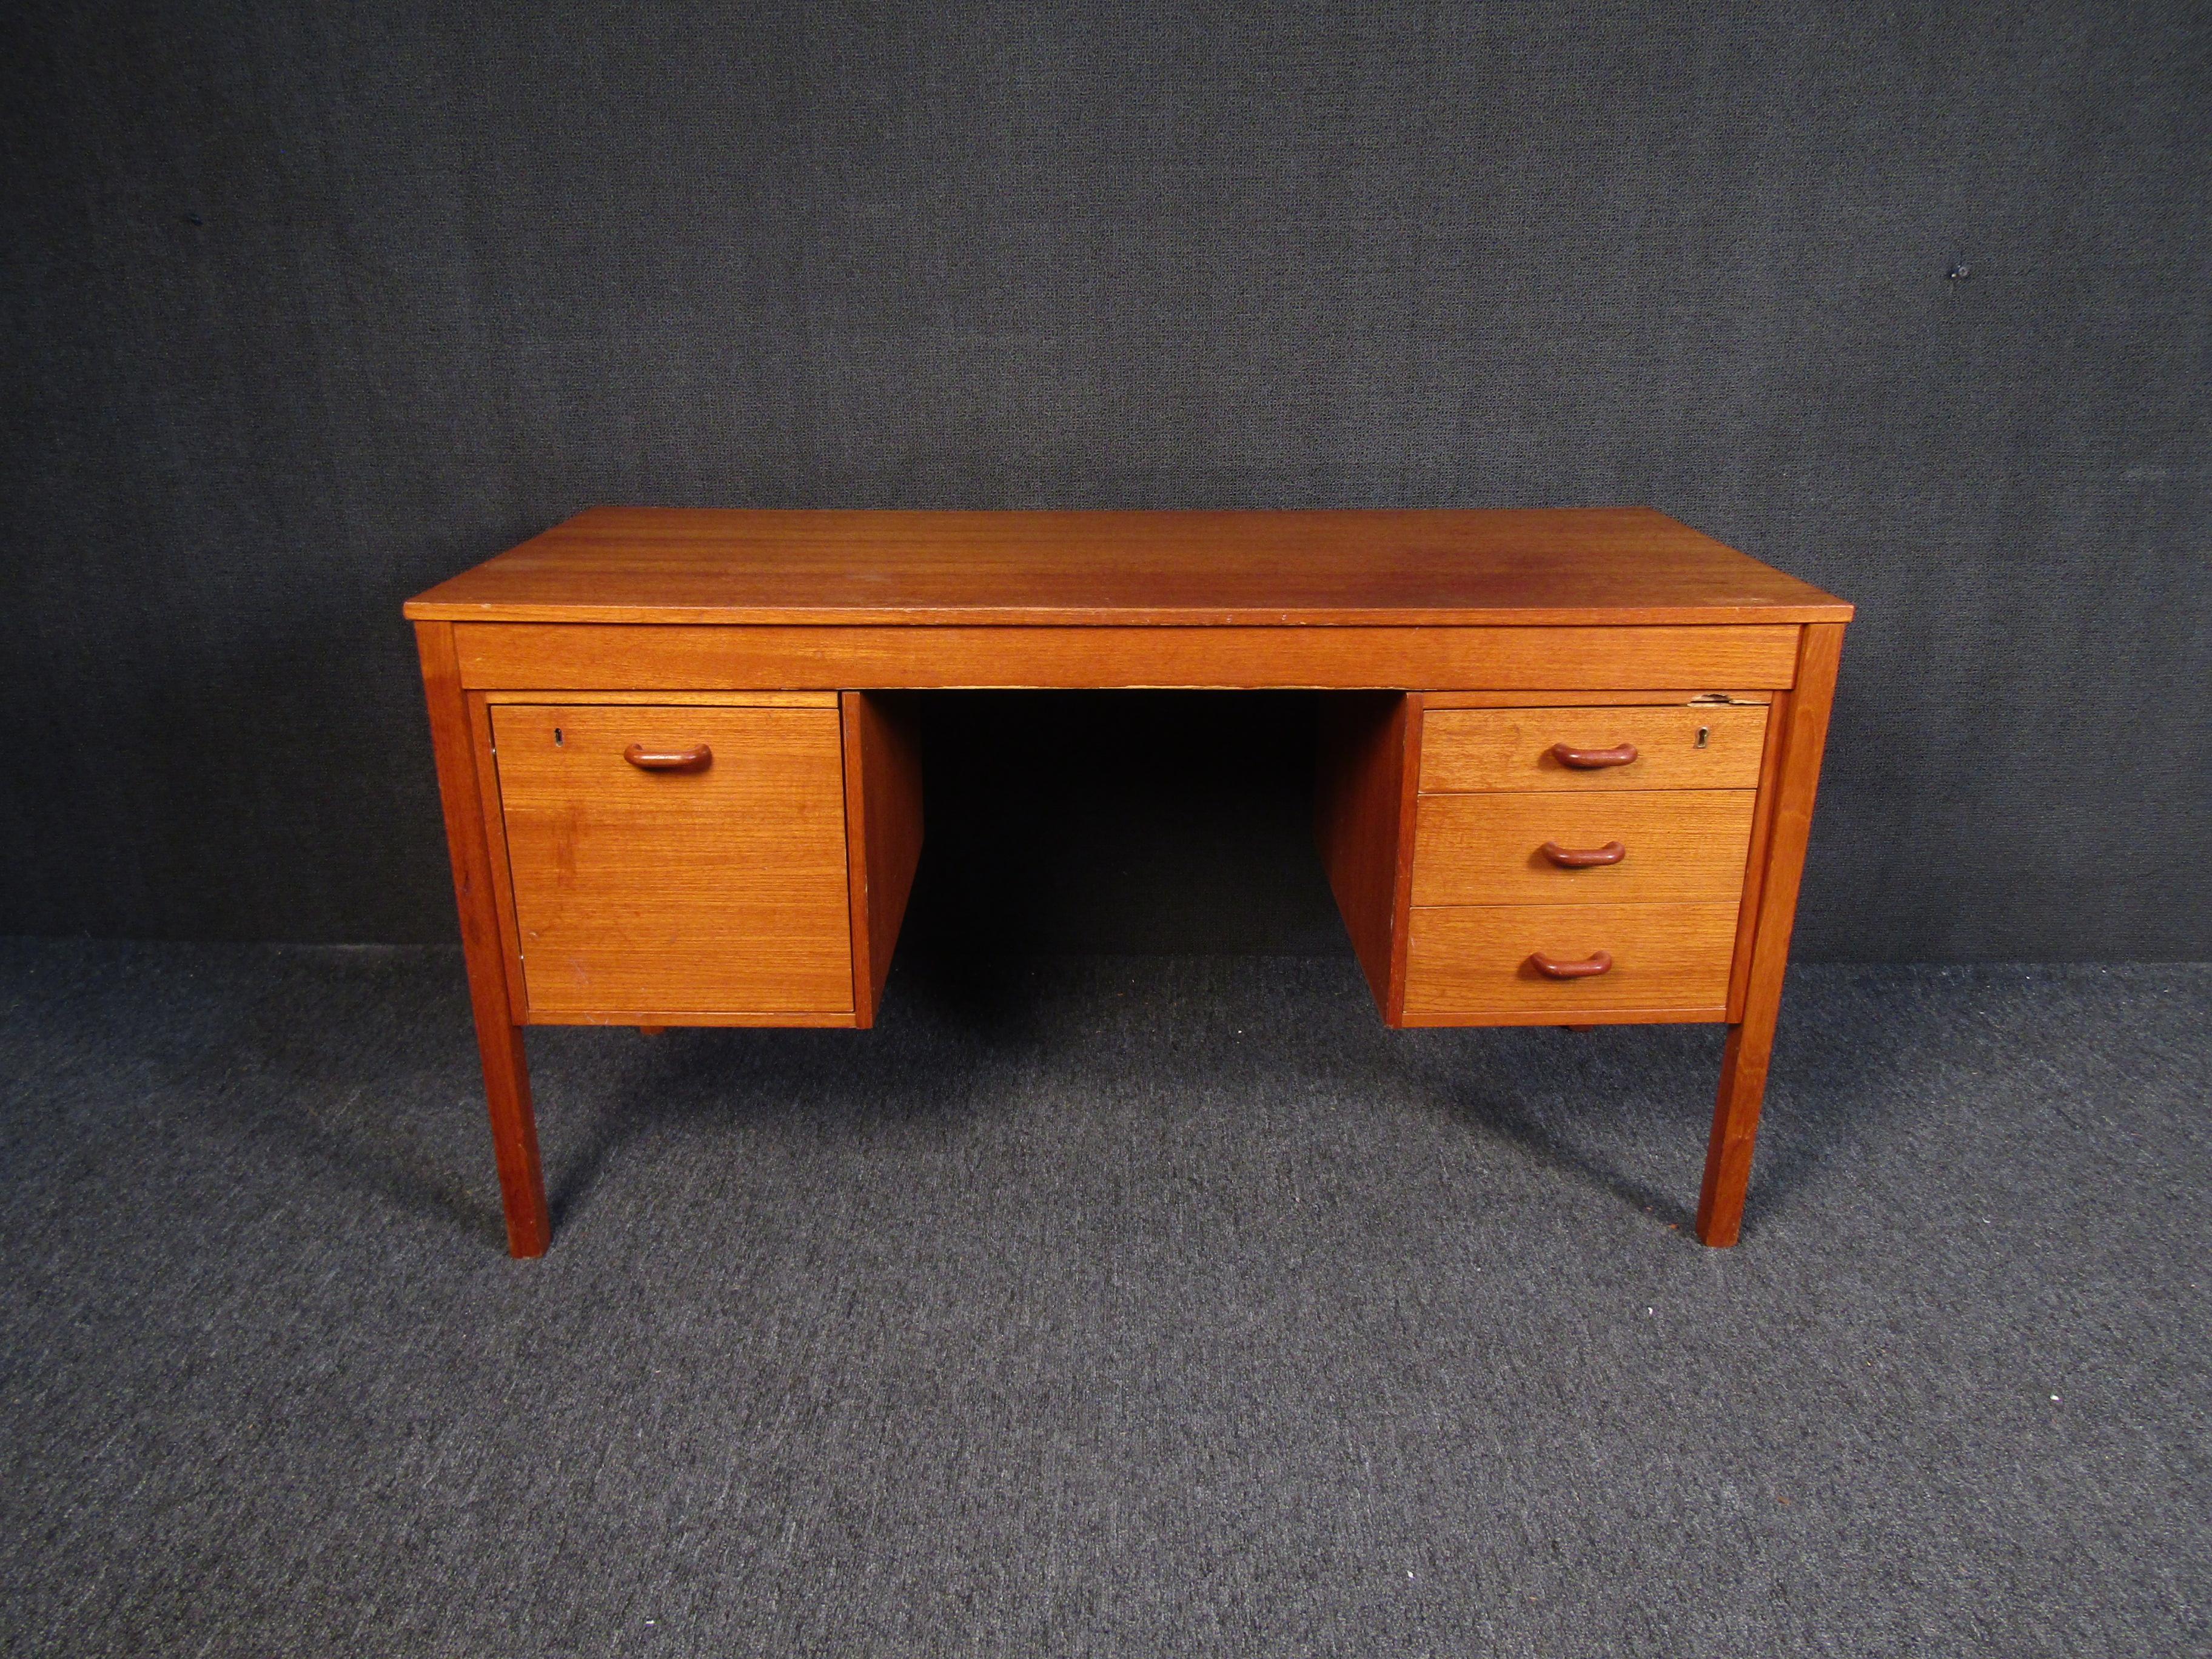 Teak desk with four drawers. Solid piece with original finish.